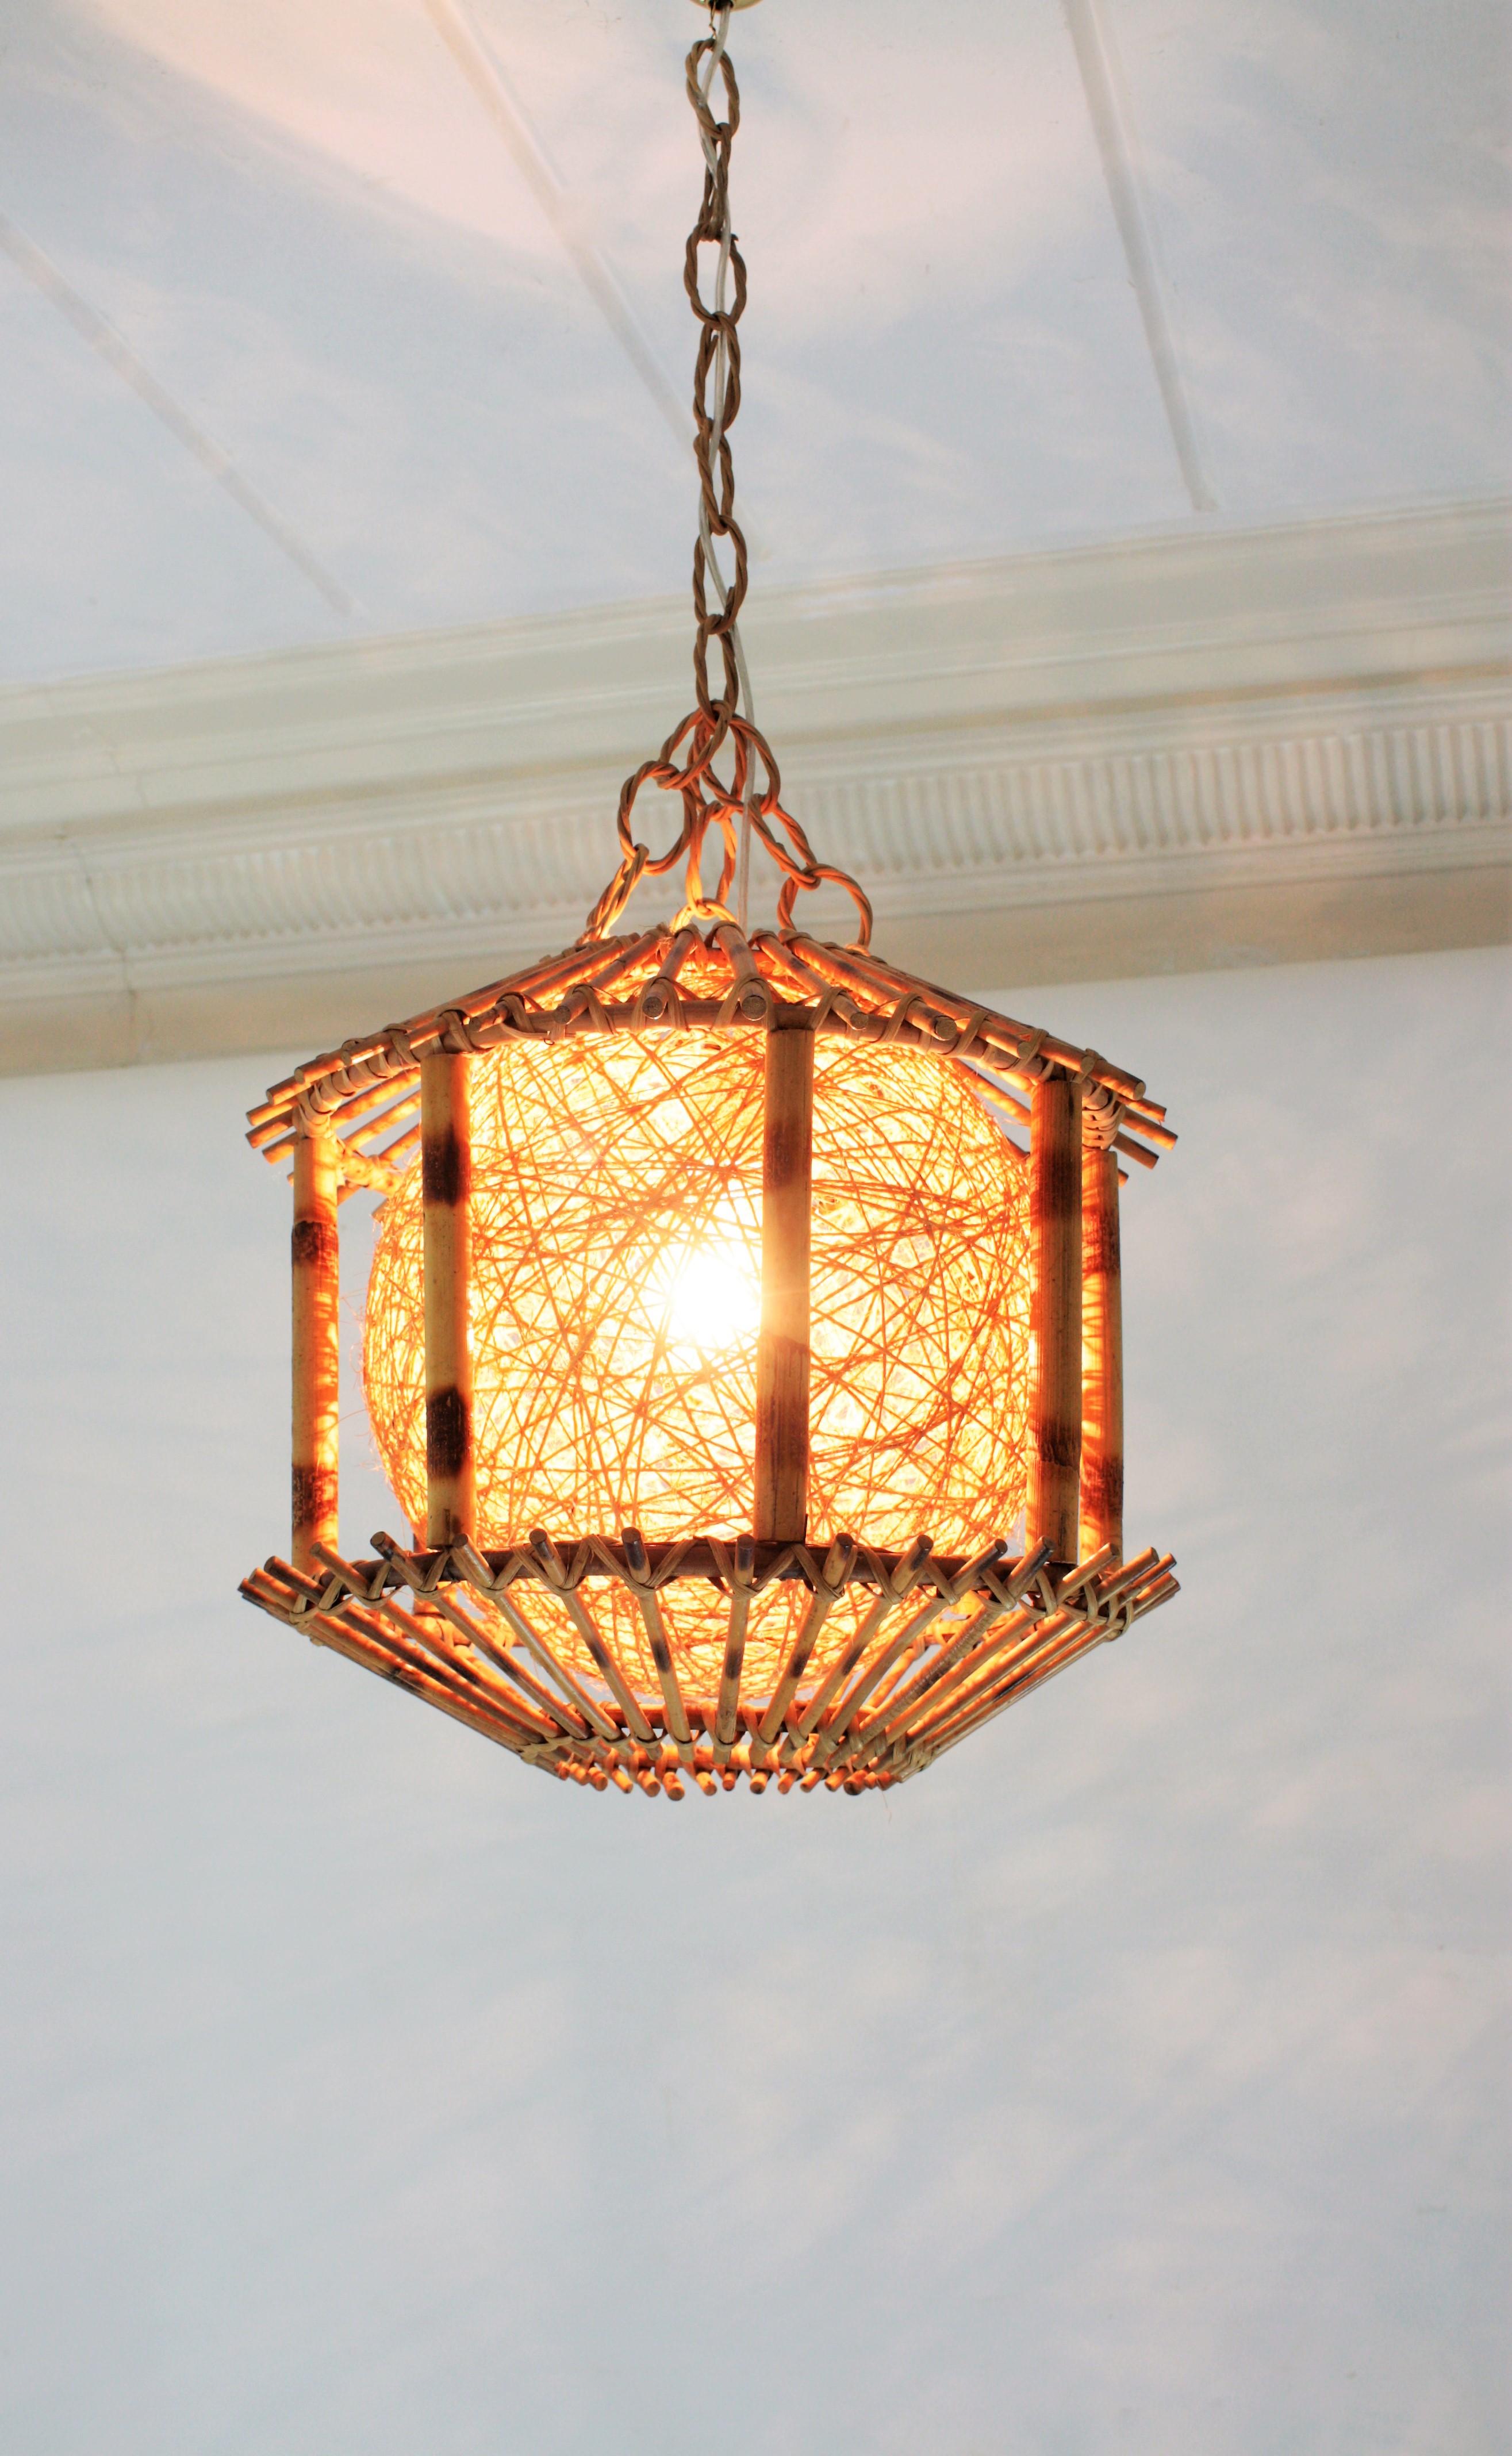 Hand-Crafted Rattan and Bamboo Pendant Hanging Lamp / Lantern with Chinoiserie Accents